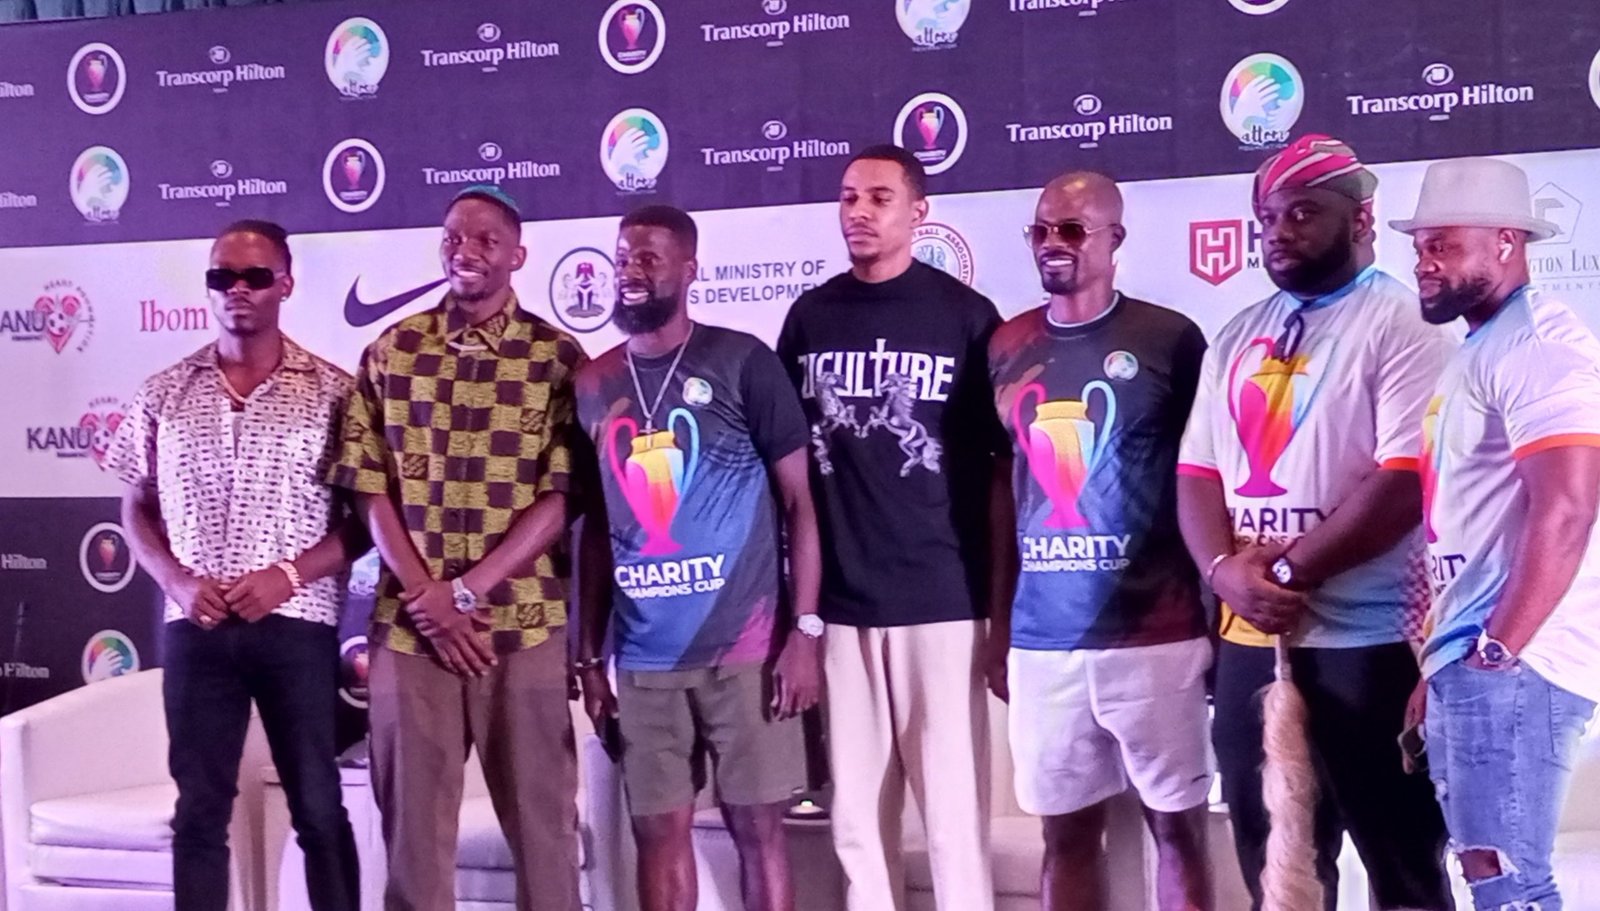  Osimhen, Okocha, Pires, others storm Abuja for Attom charity cup